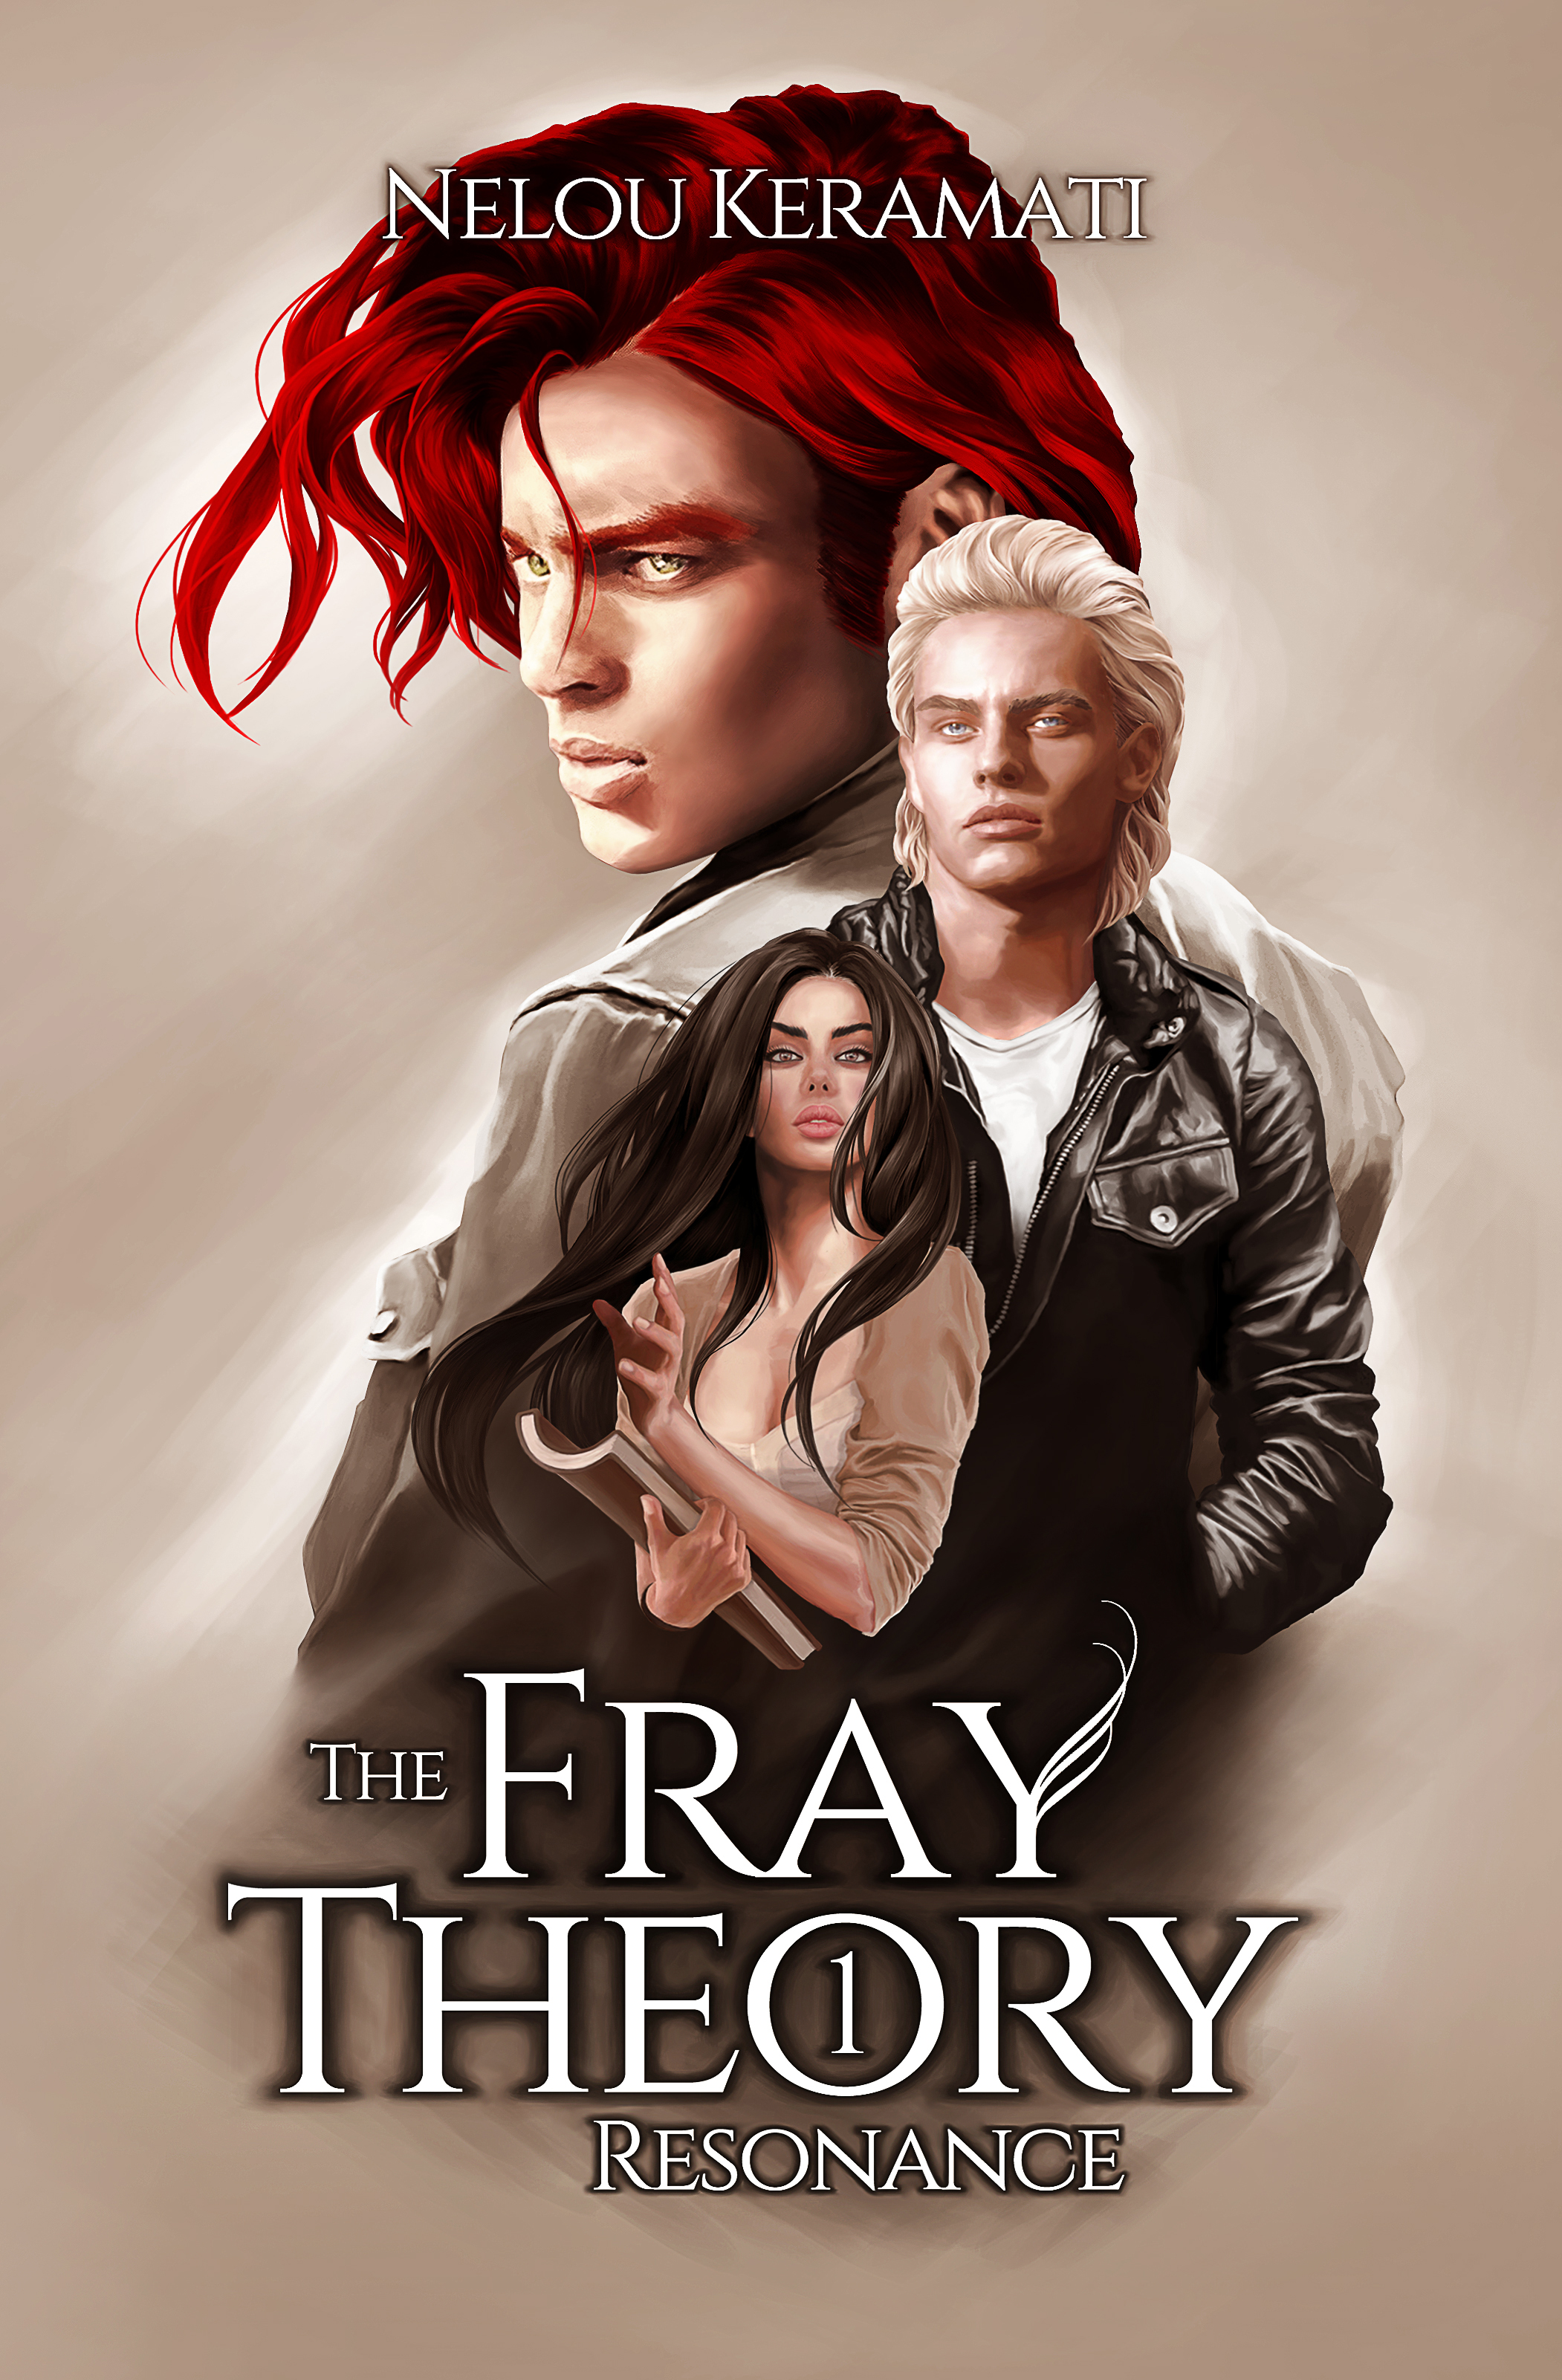 The Fray Theory Resonance Book Cover